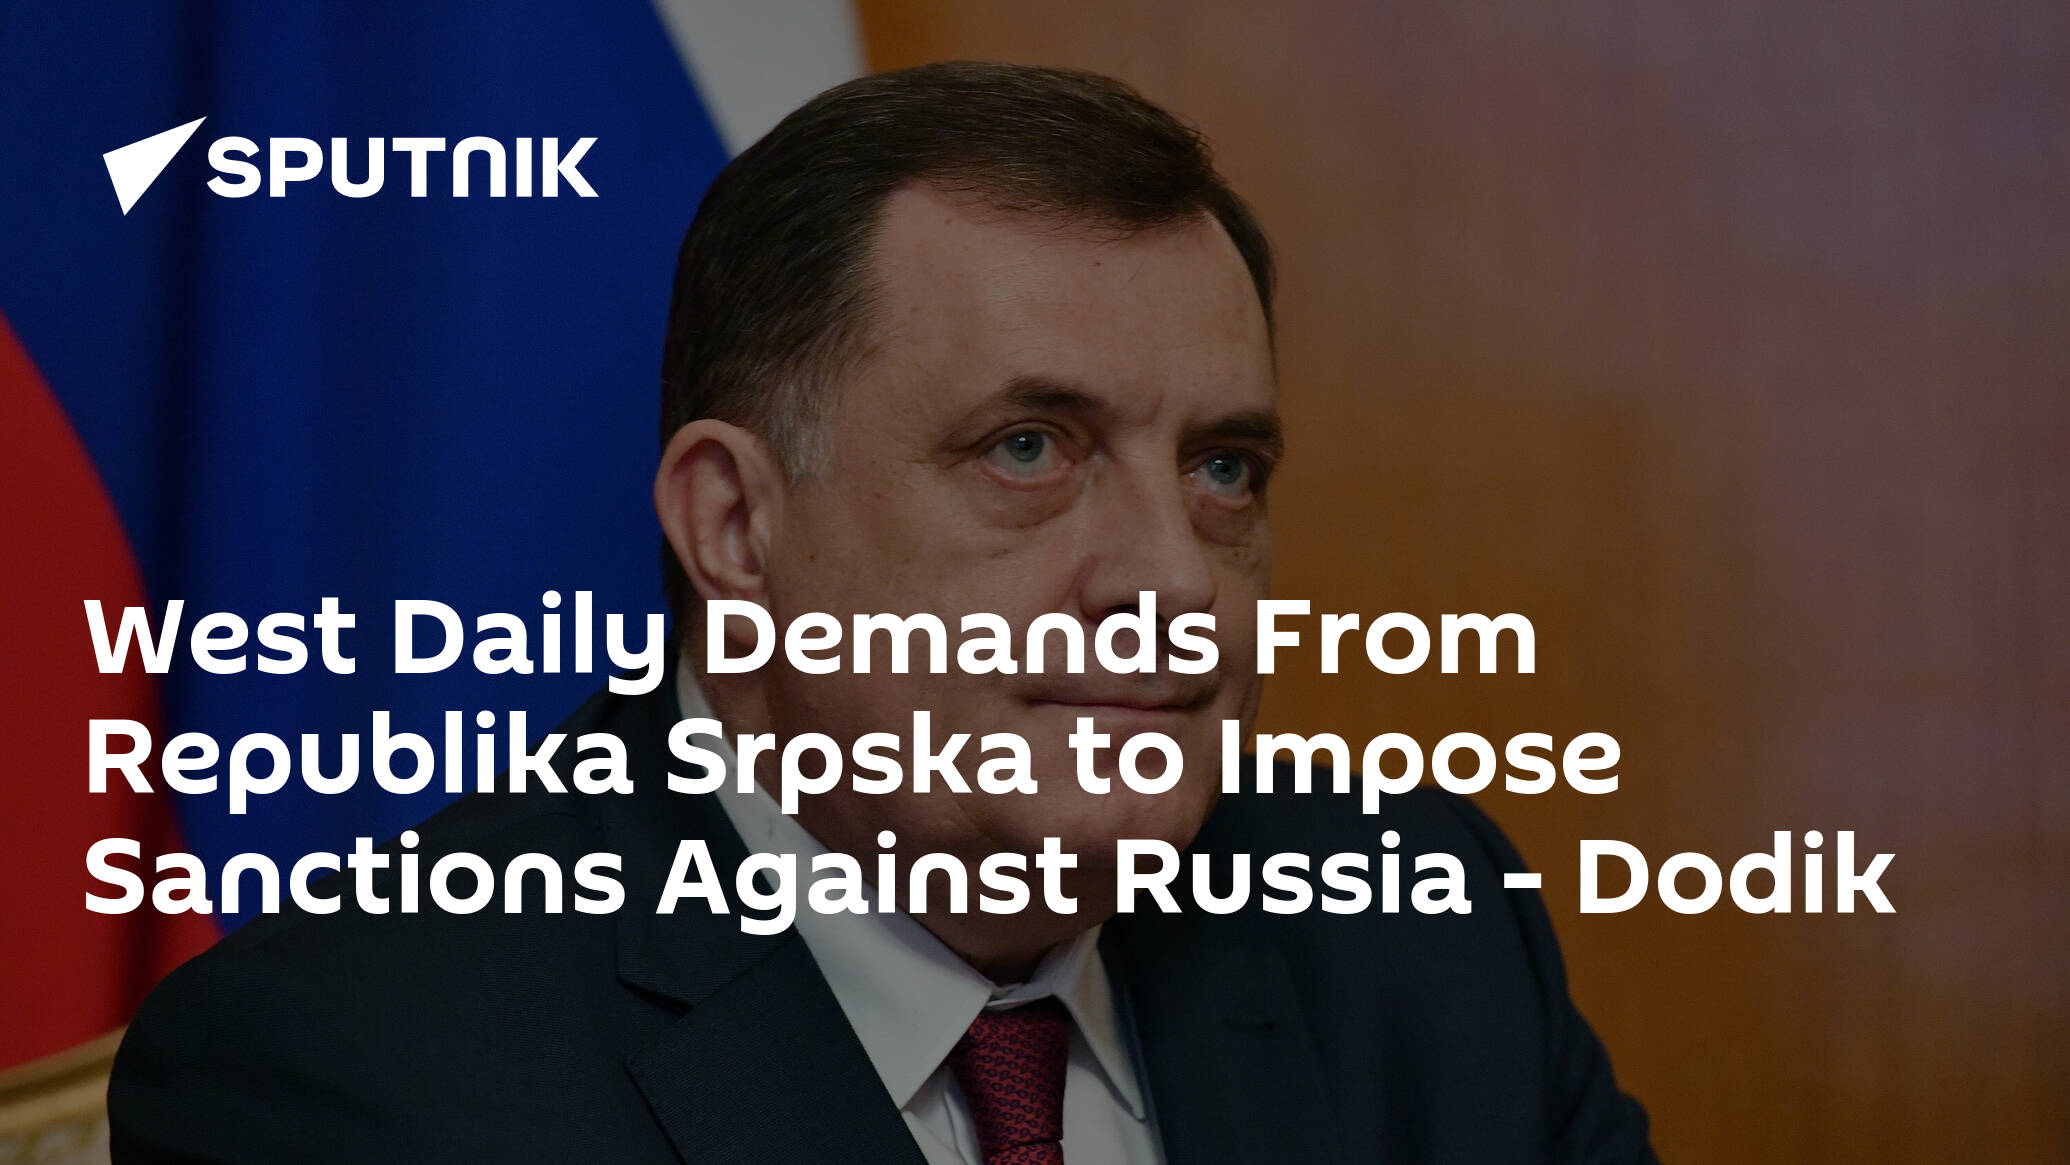 West Daily Demands From Republika Srpska to Impose Sanctions Against Russia – Dodik